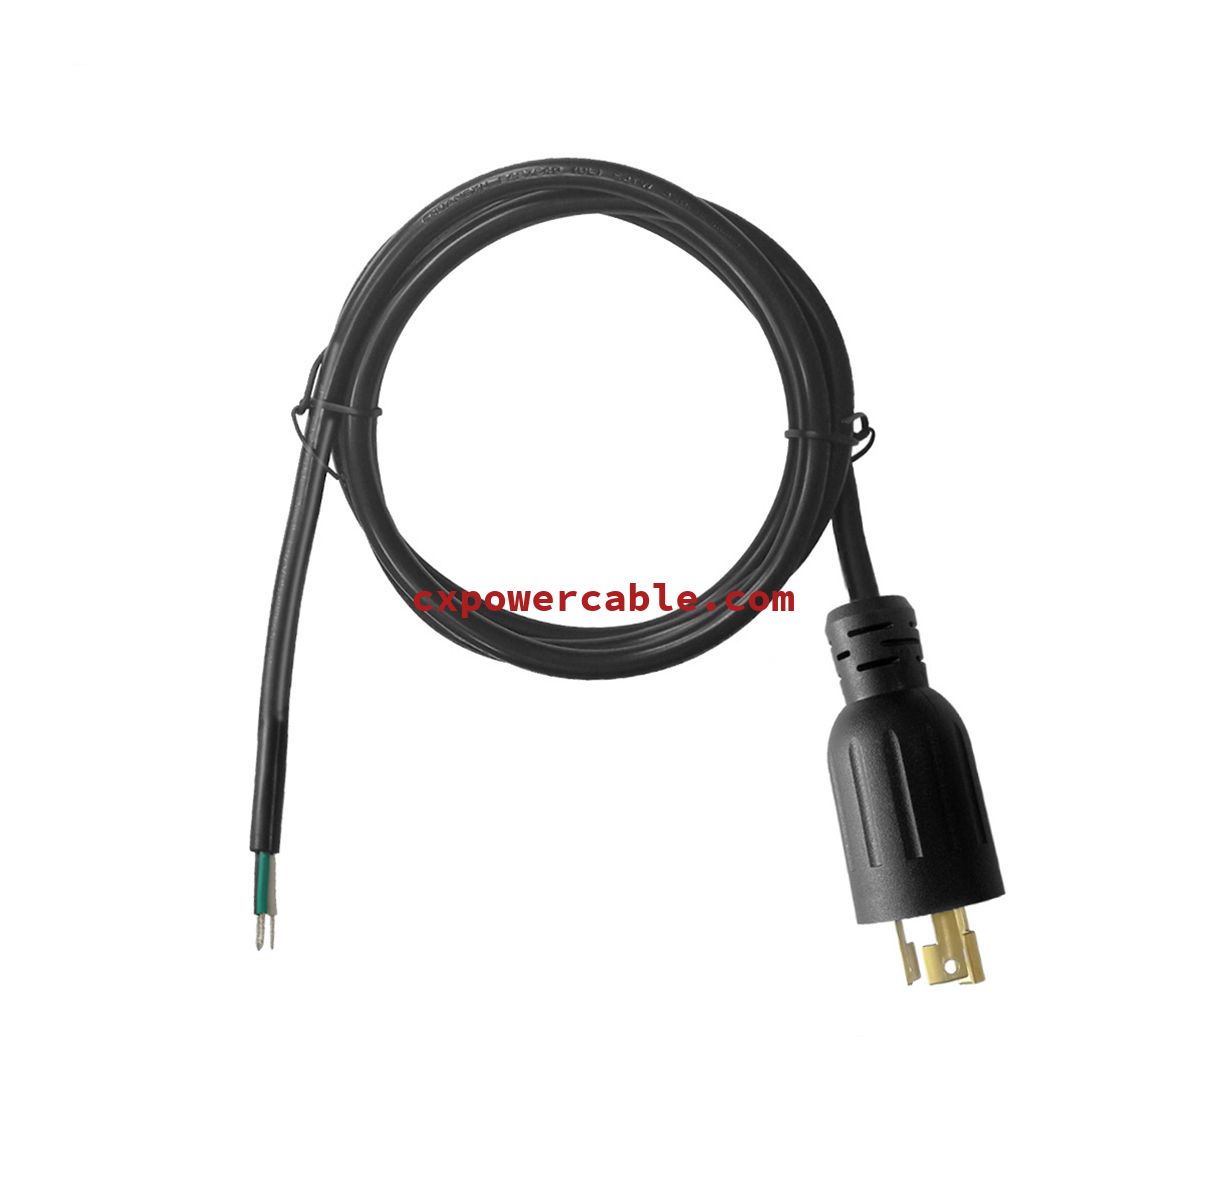 L7-15P American standard 3-prong AC power cord high power 277V American lock industrial plug cable